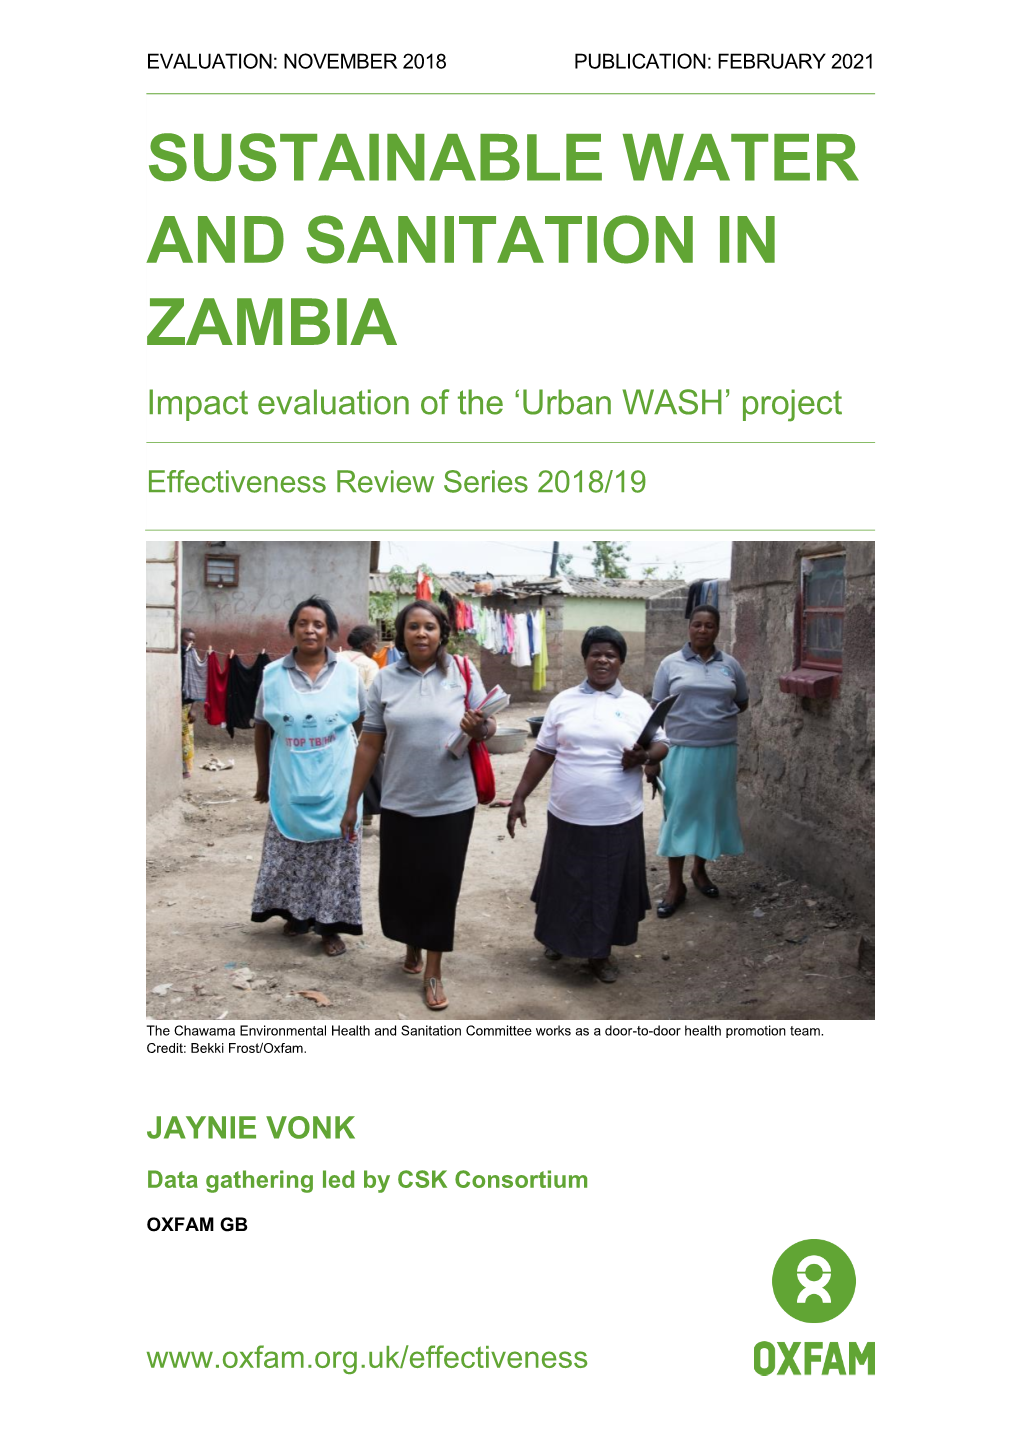 SUSTAINABLE WATER and SANITATION in ZAMBIA Impact Evaluation of the ‘Urban WASH’ Project